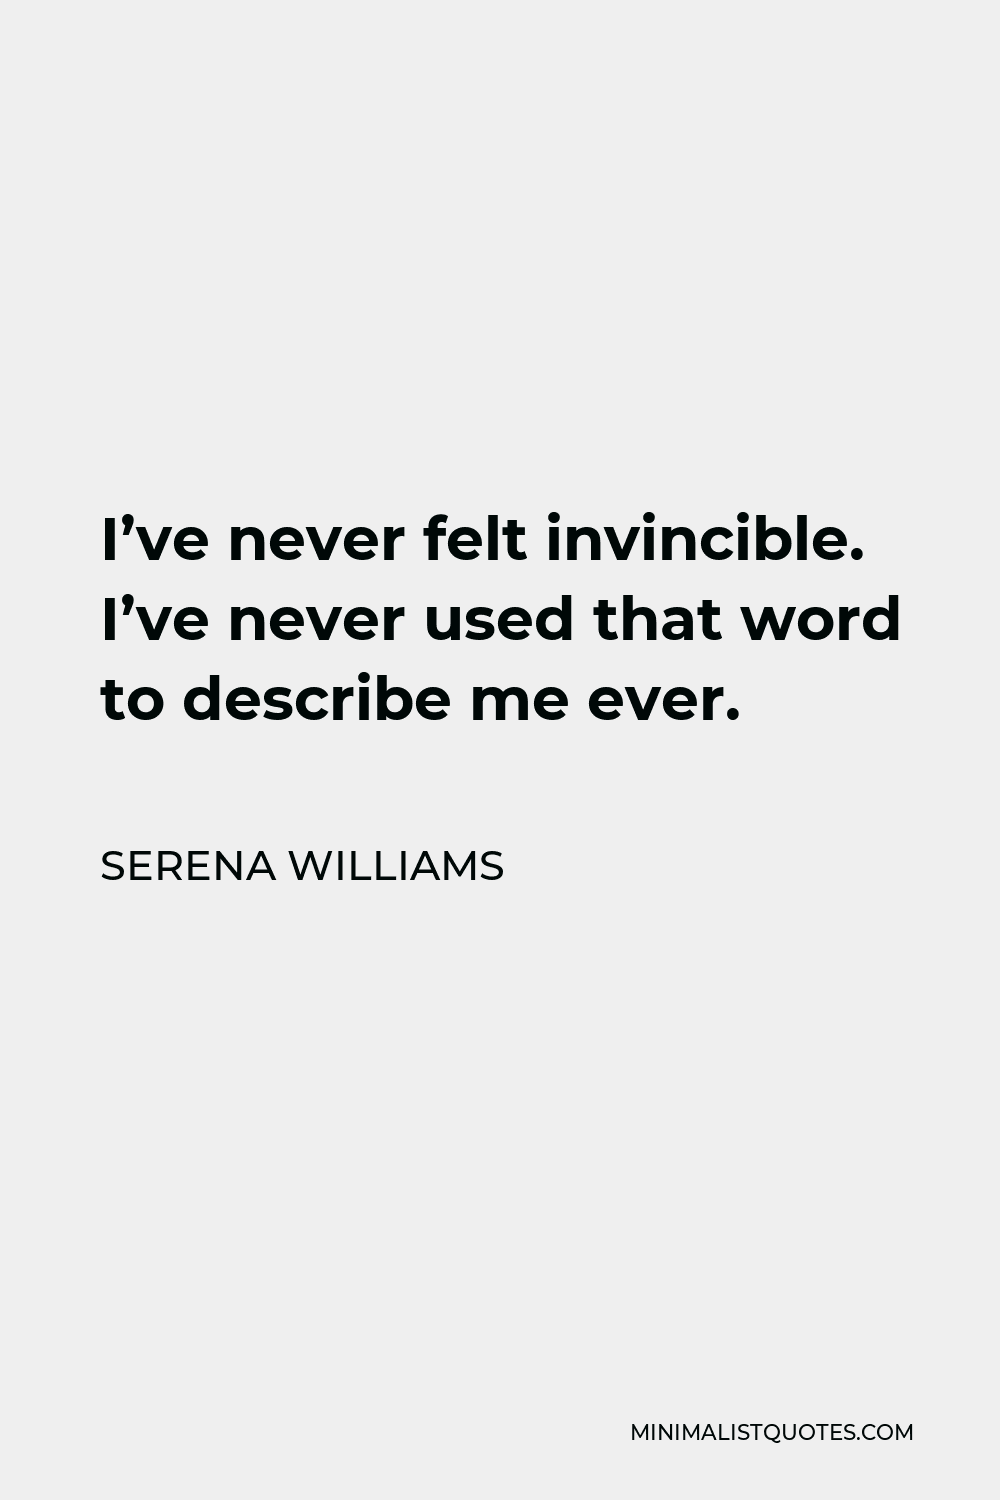 Serena Williams Quote - I’ve never felt invincible. I’ve never used that word to describe me ever.